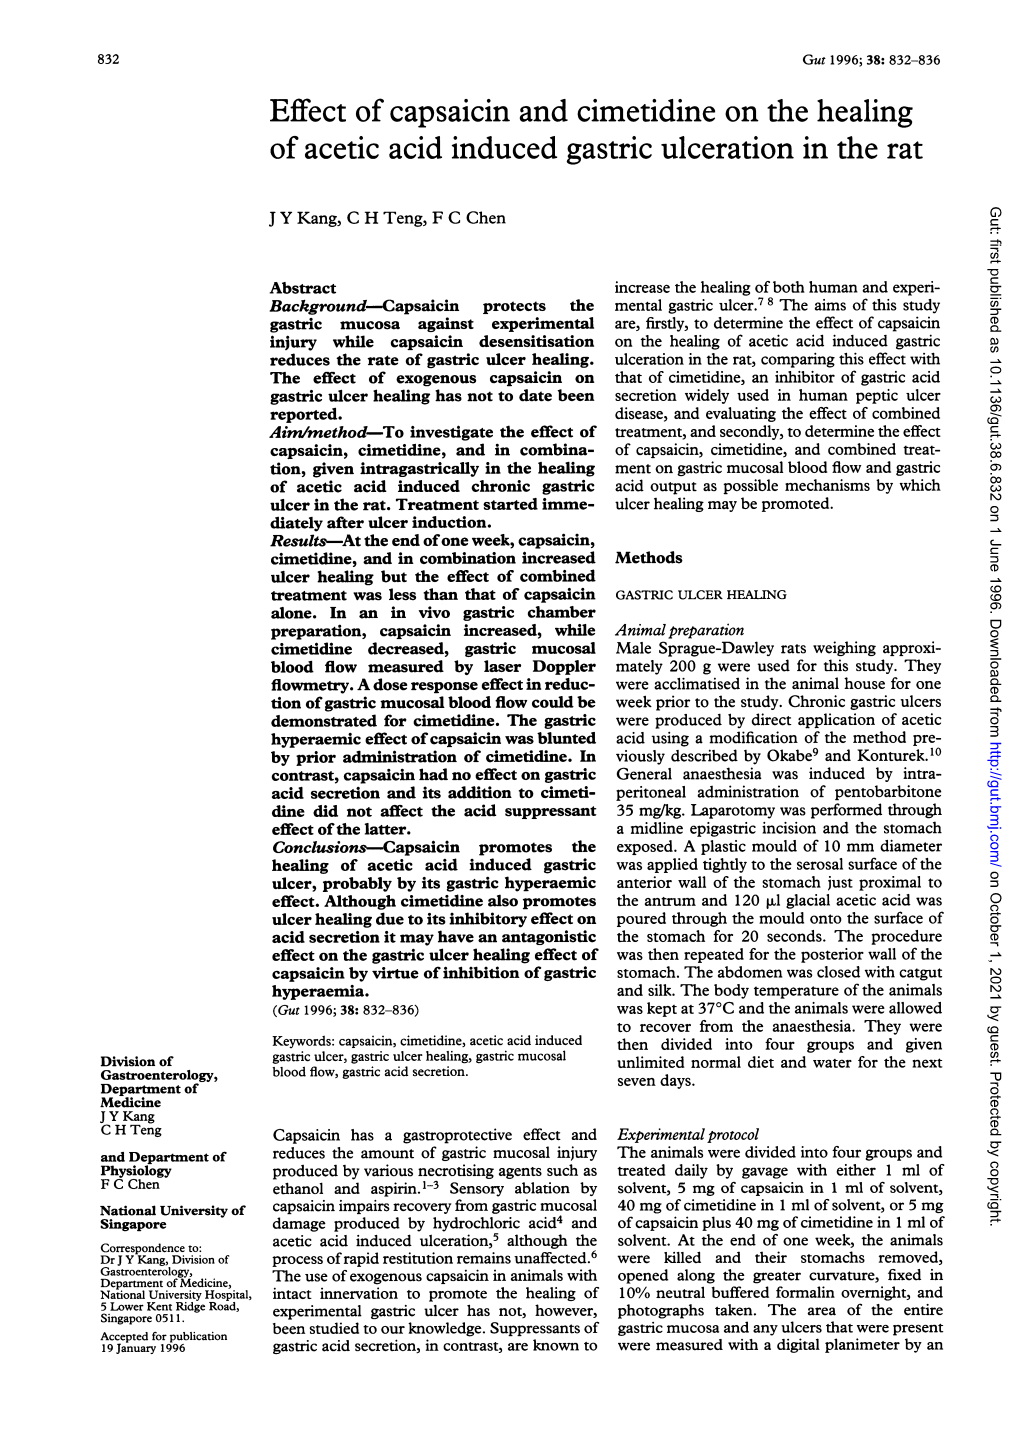 Of Acetic Acid Induced Gastric Ulceration in the Rat Gut: First Published As 10.1136/Gut.38.6.832 on 1 June 1996